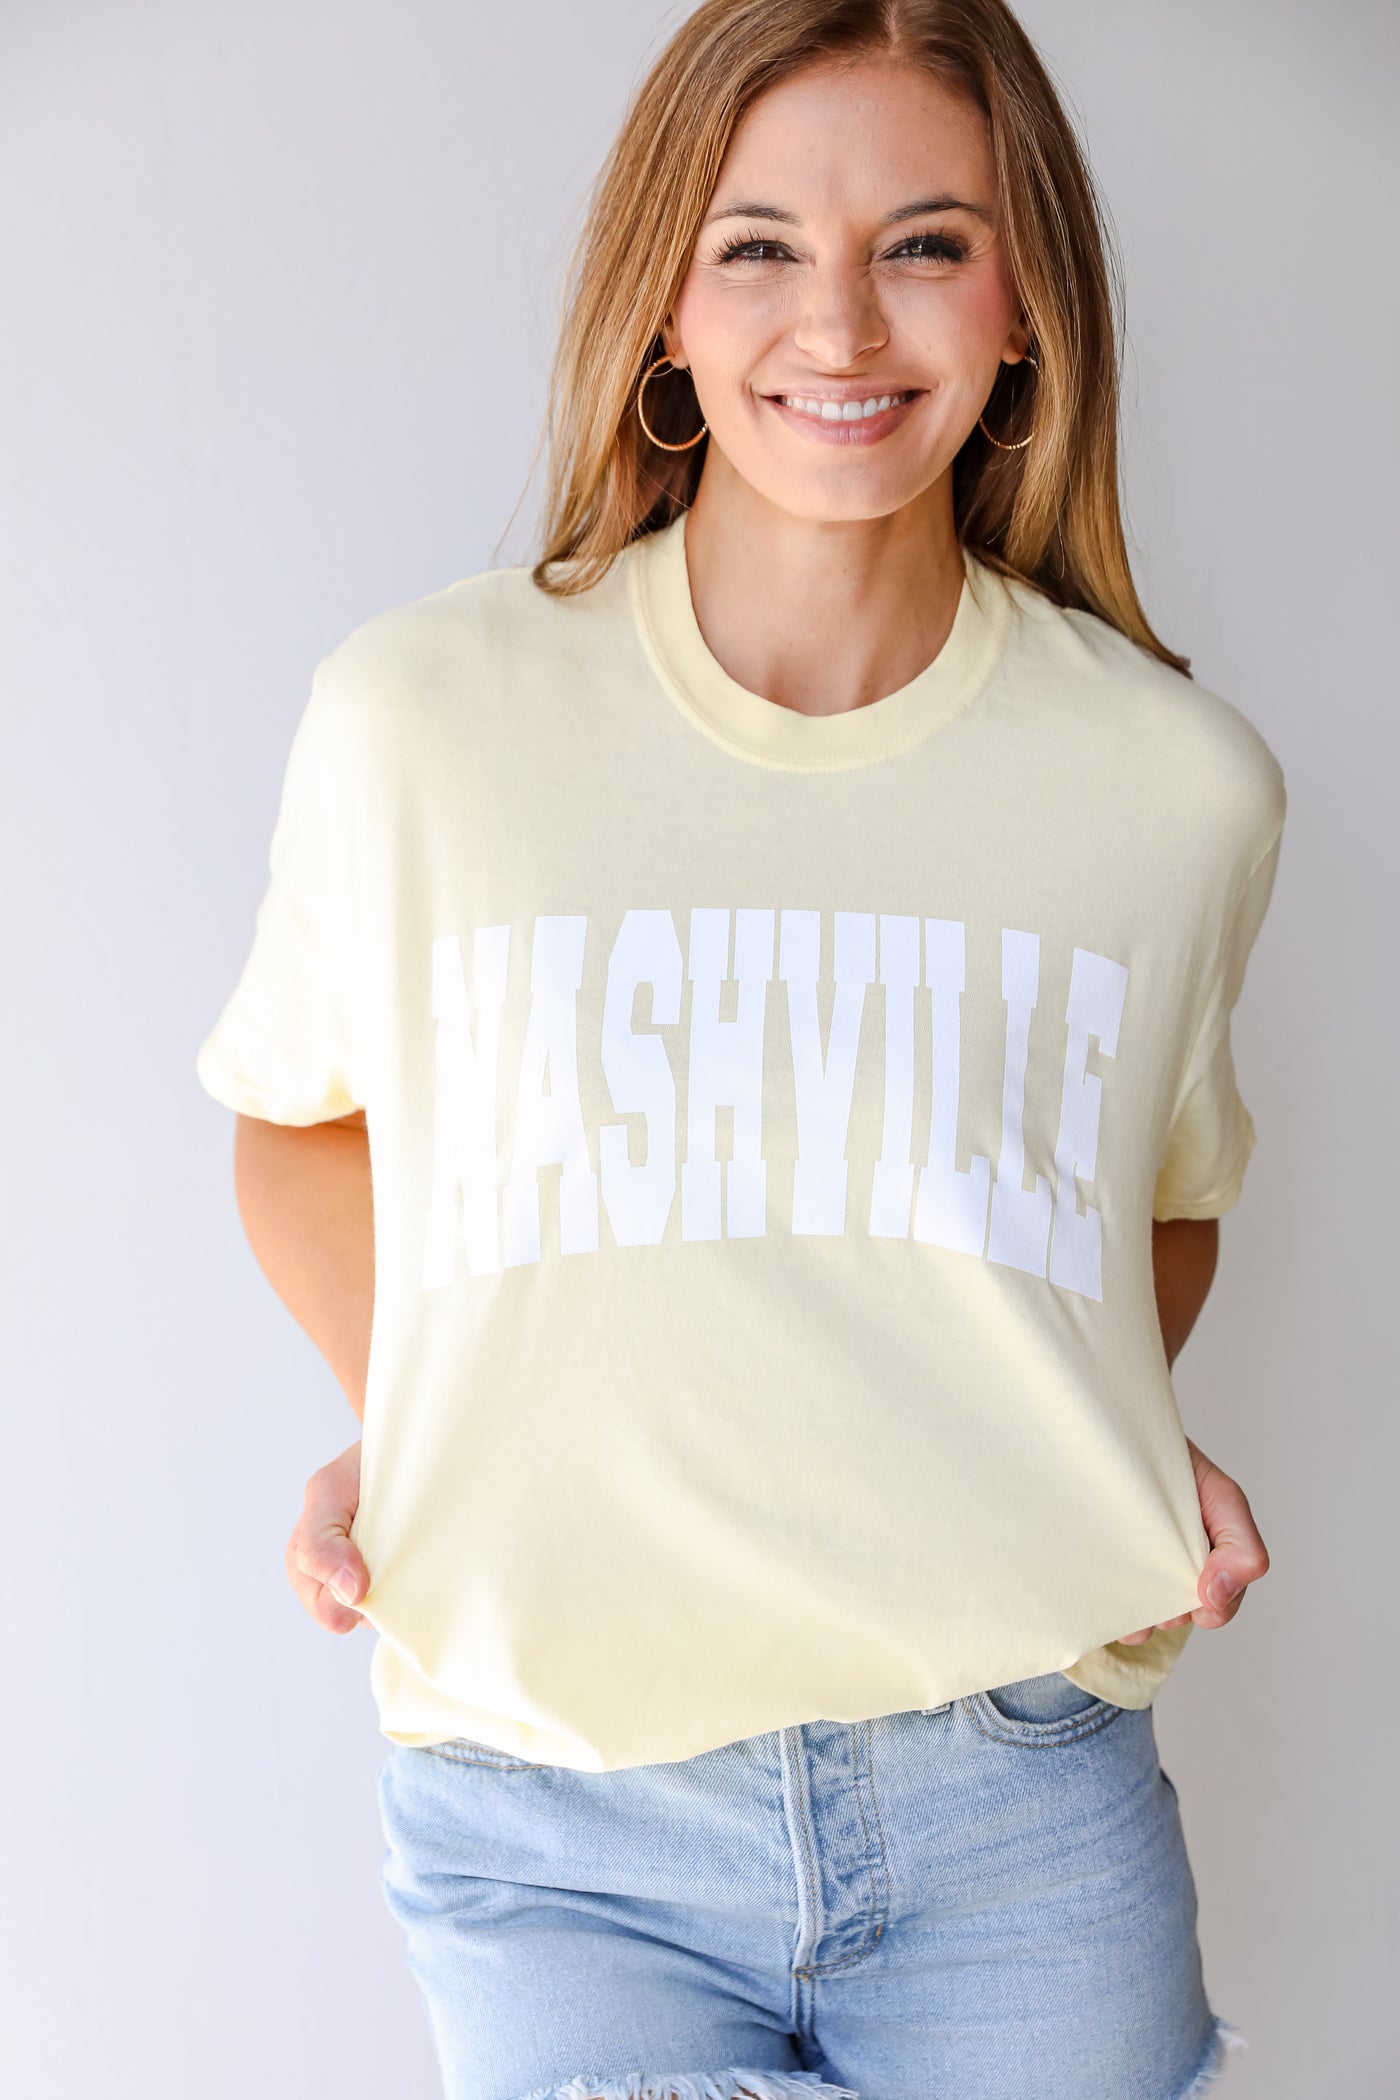 Yellow Nashville Tee from dress up